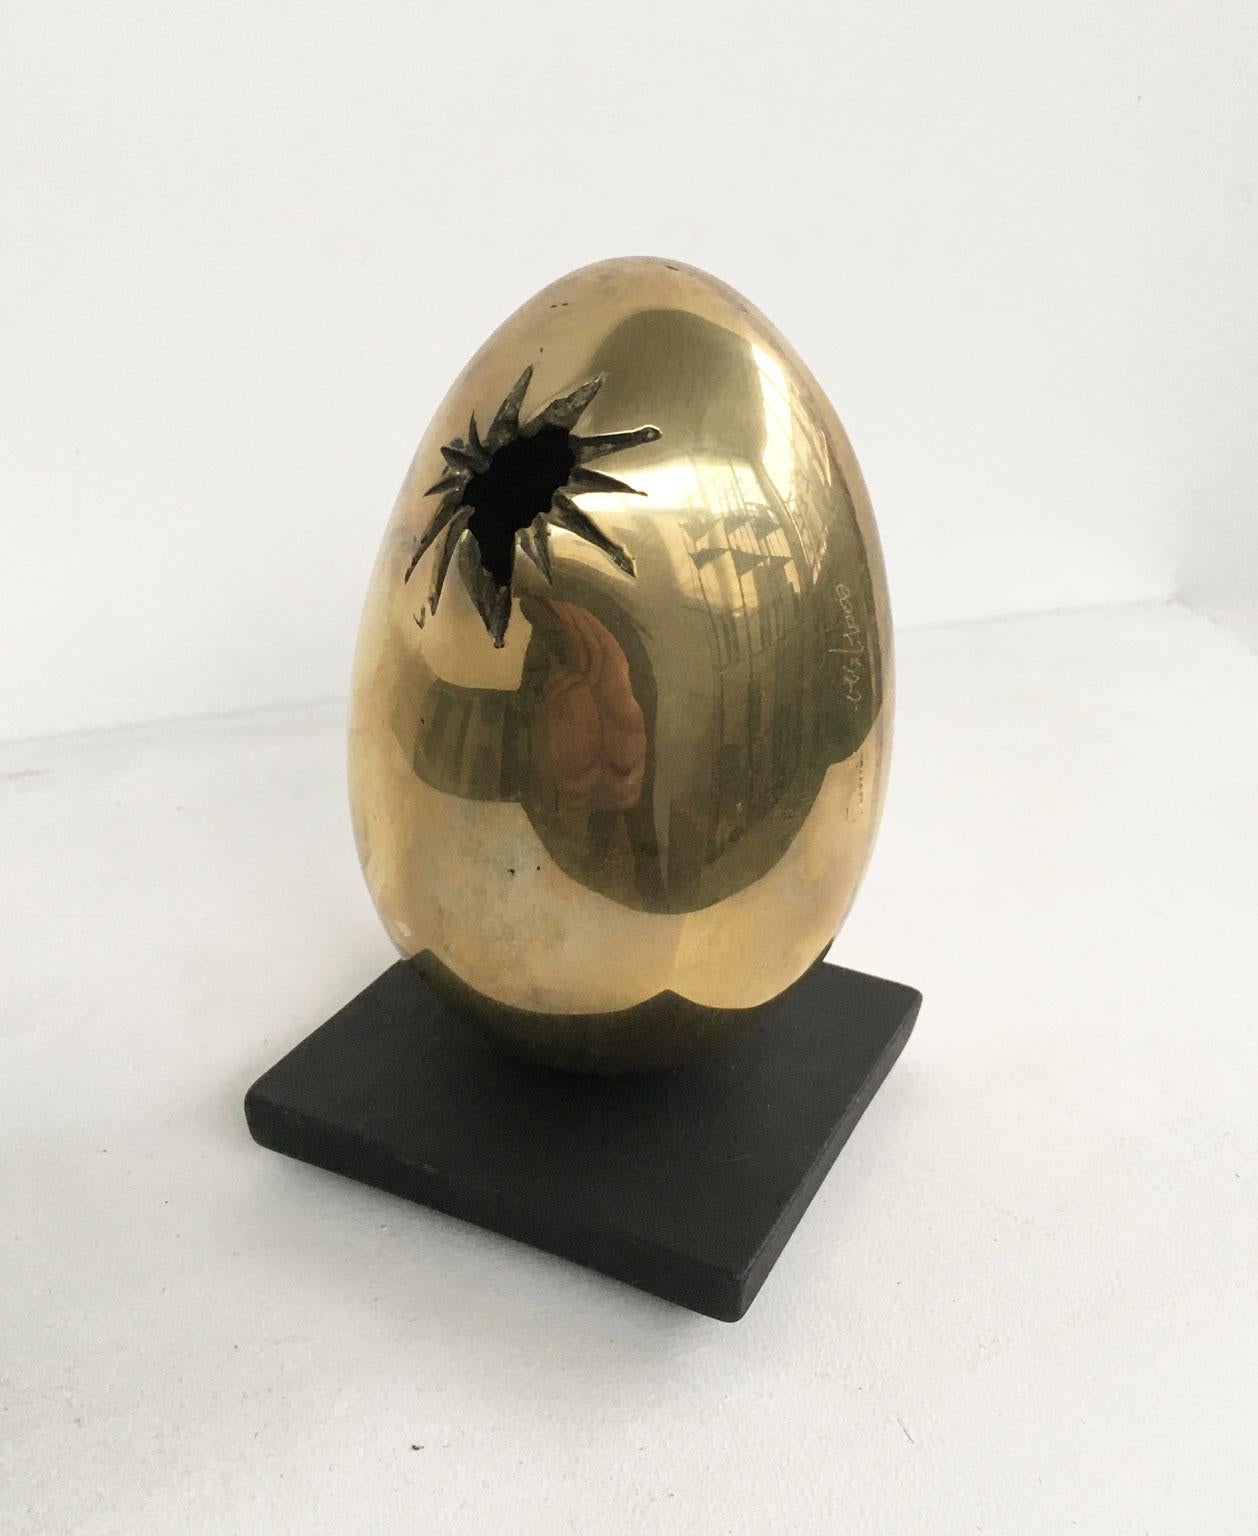 1978 Italy Bronze Abstract Sculpture by Fanna Roncoroni Forma Ovale Oval Shape For Sale 2